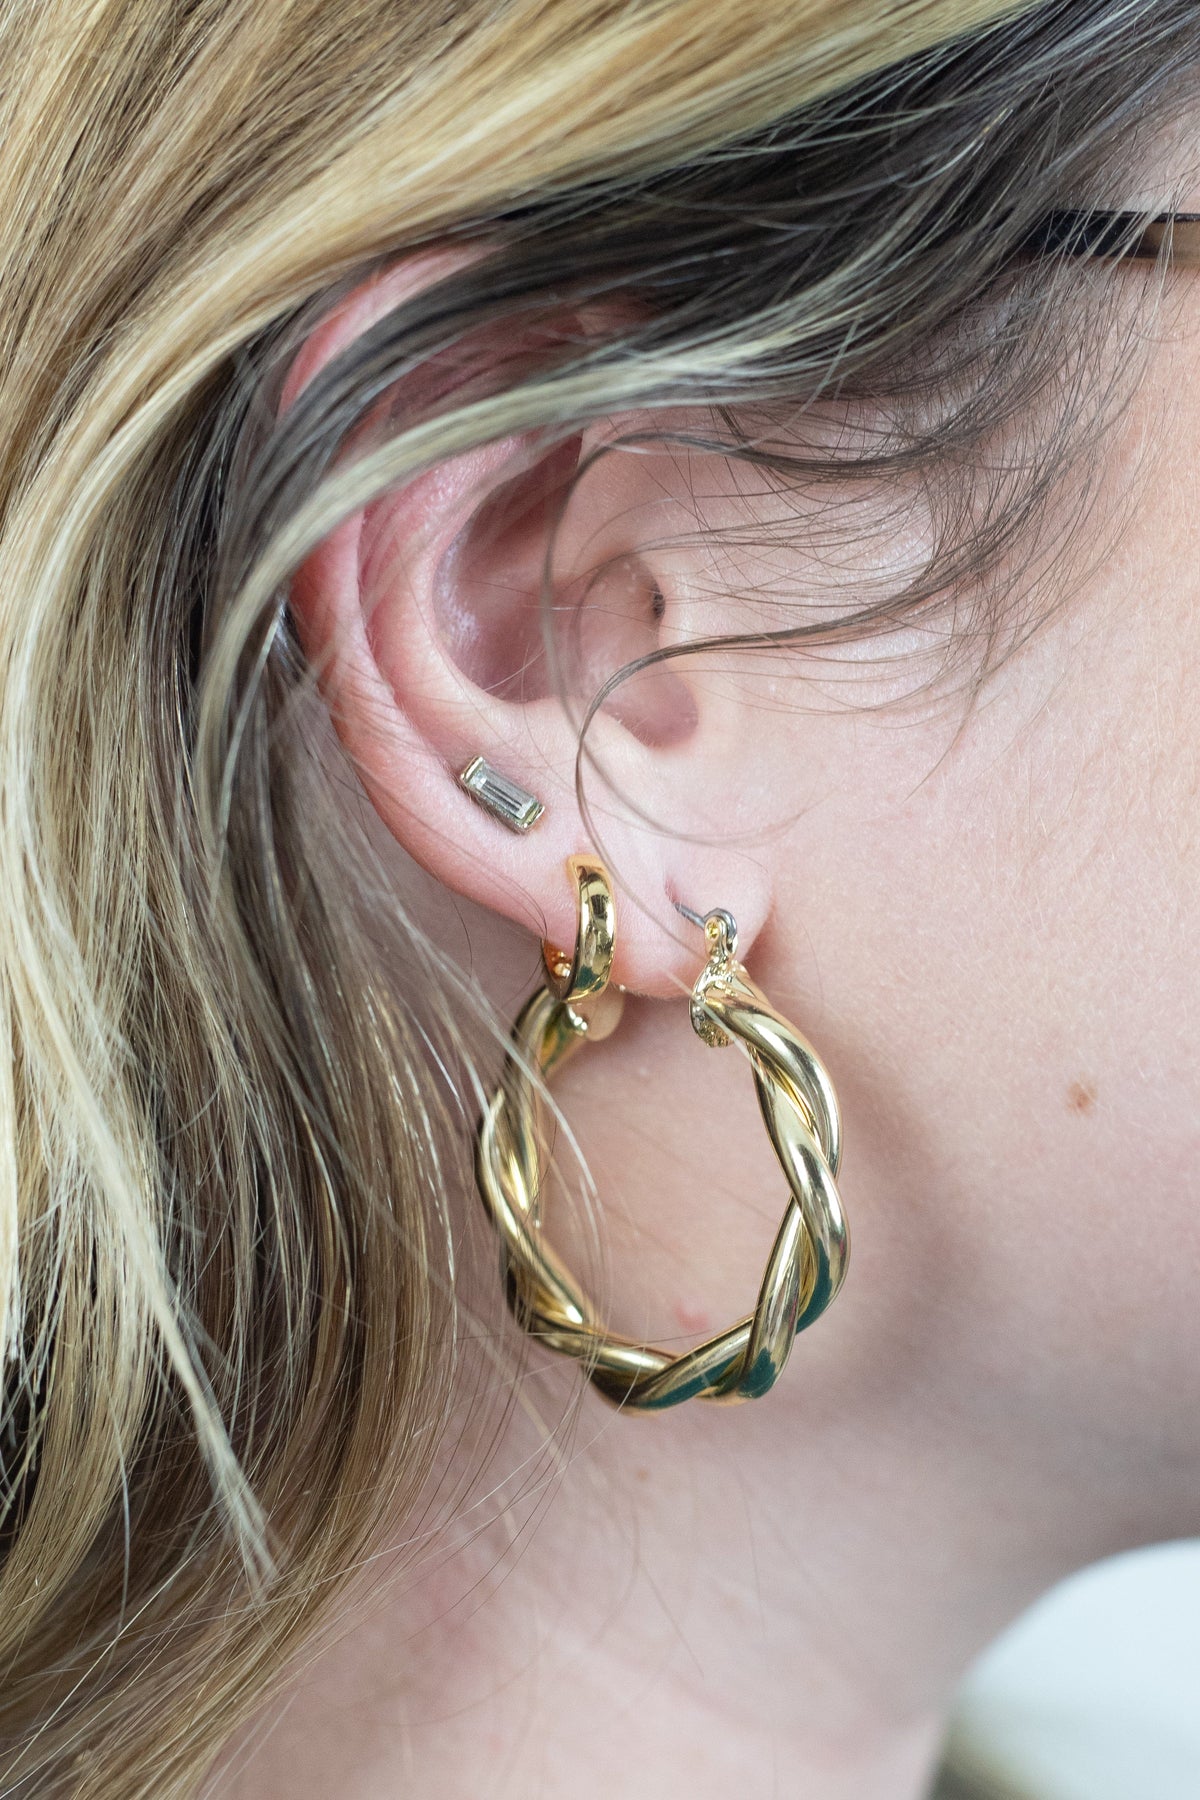 Gold Twisted Hoop